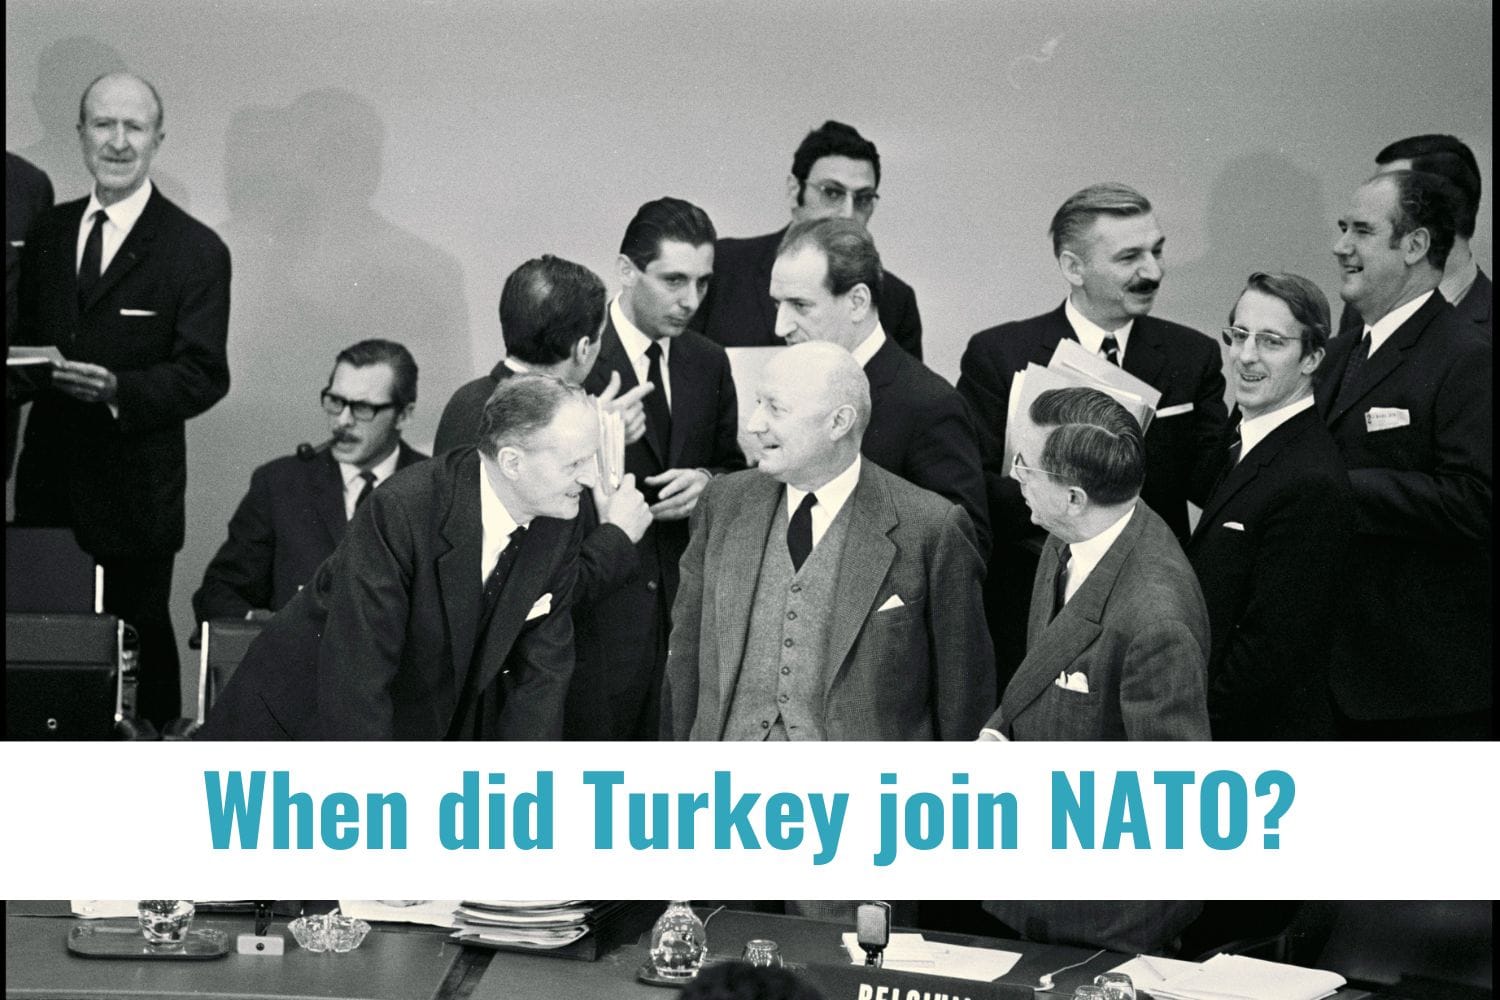 Group of men signing Turkey into NATO answering the question of When did Turkey join NATO?